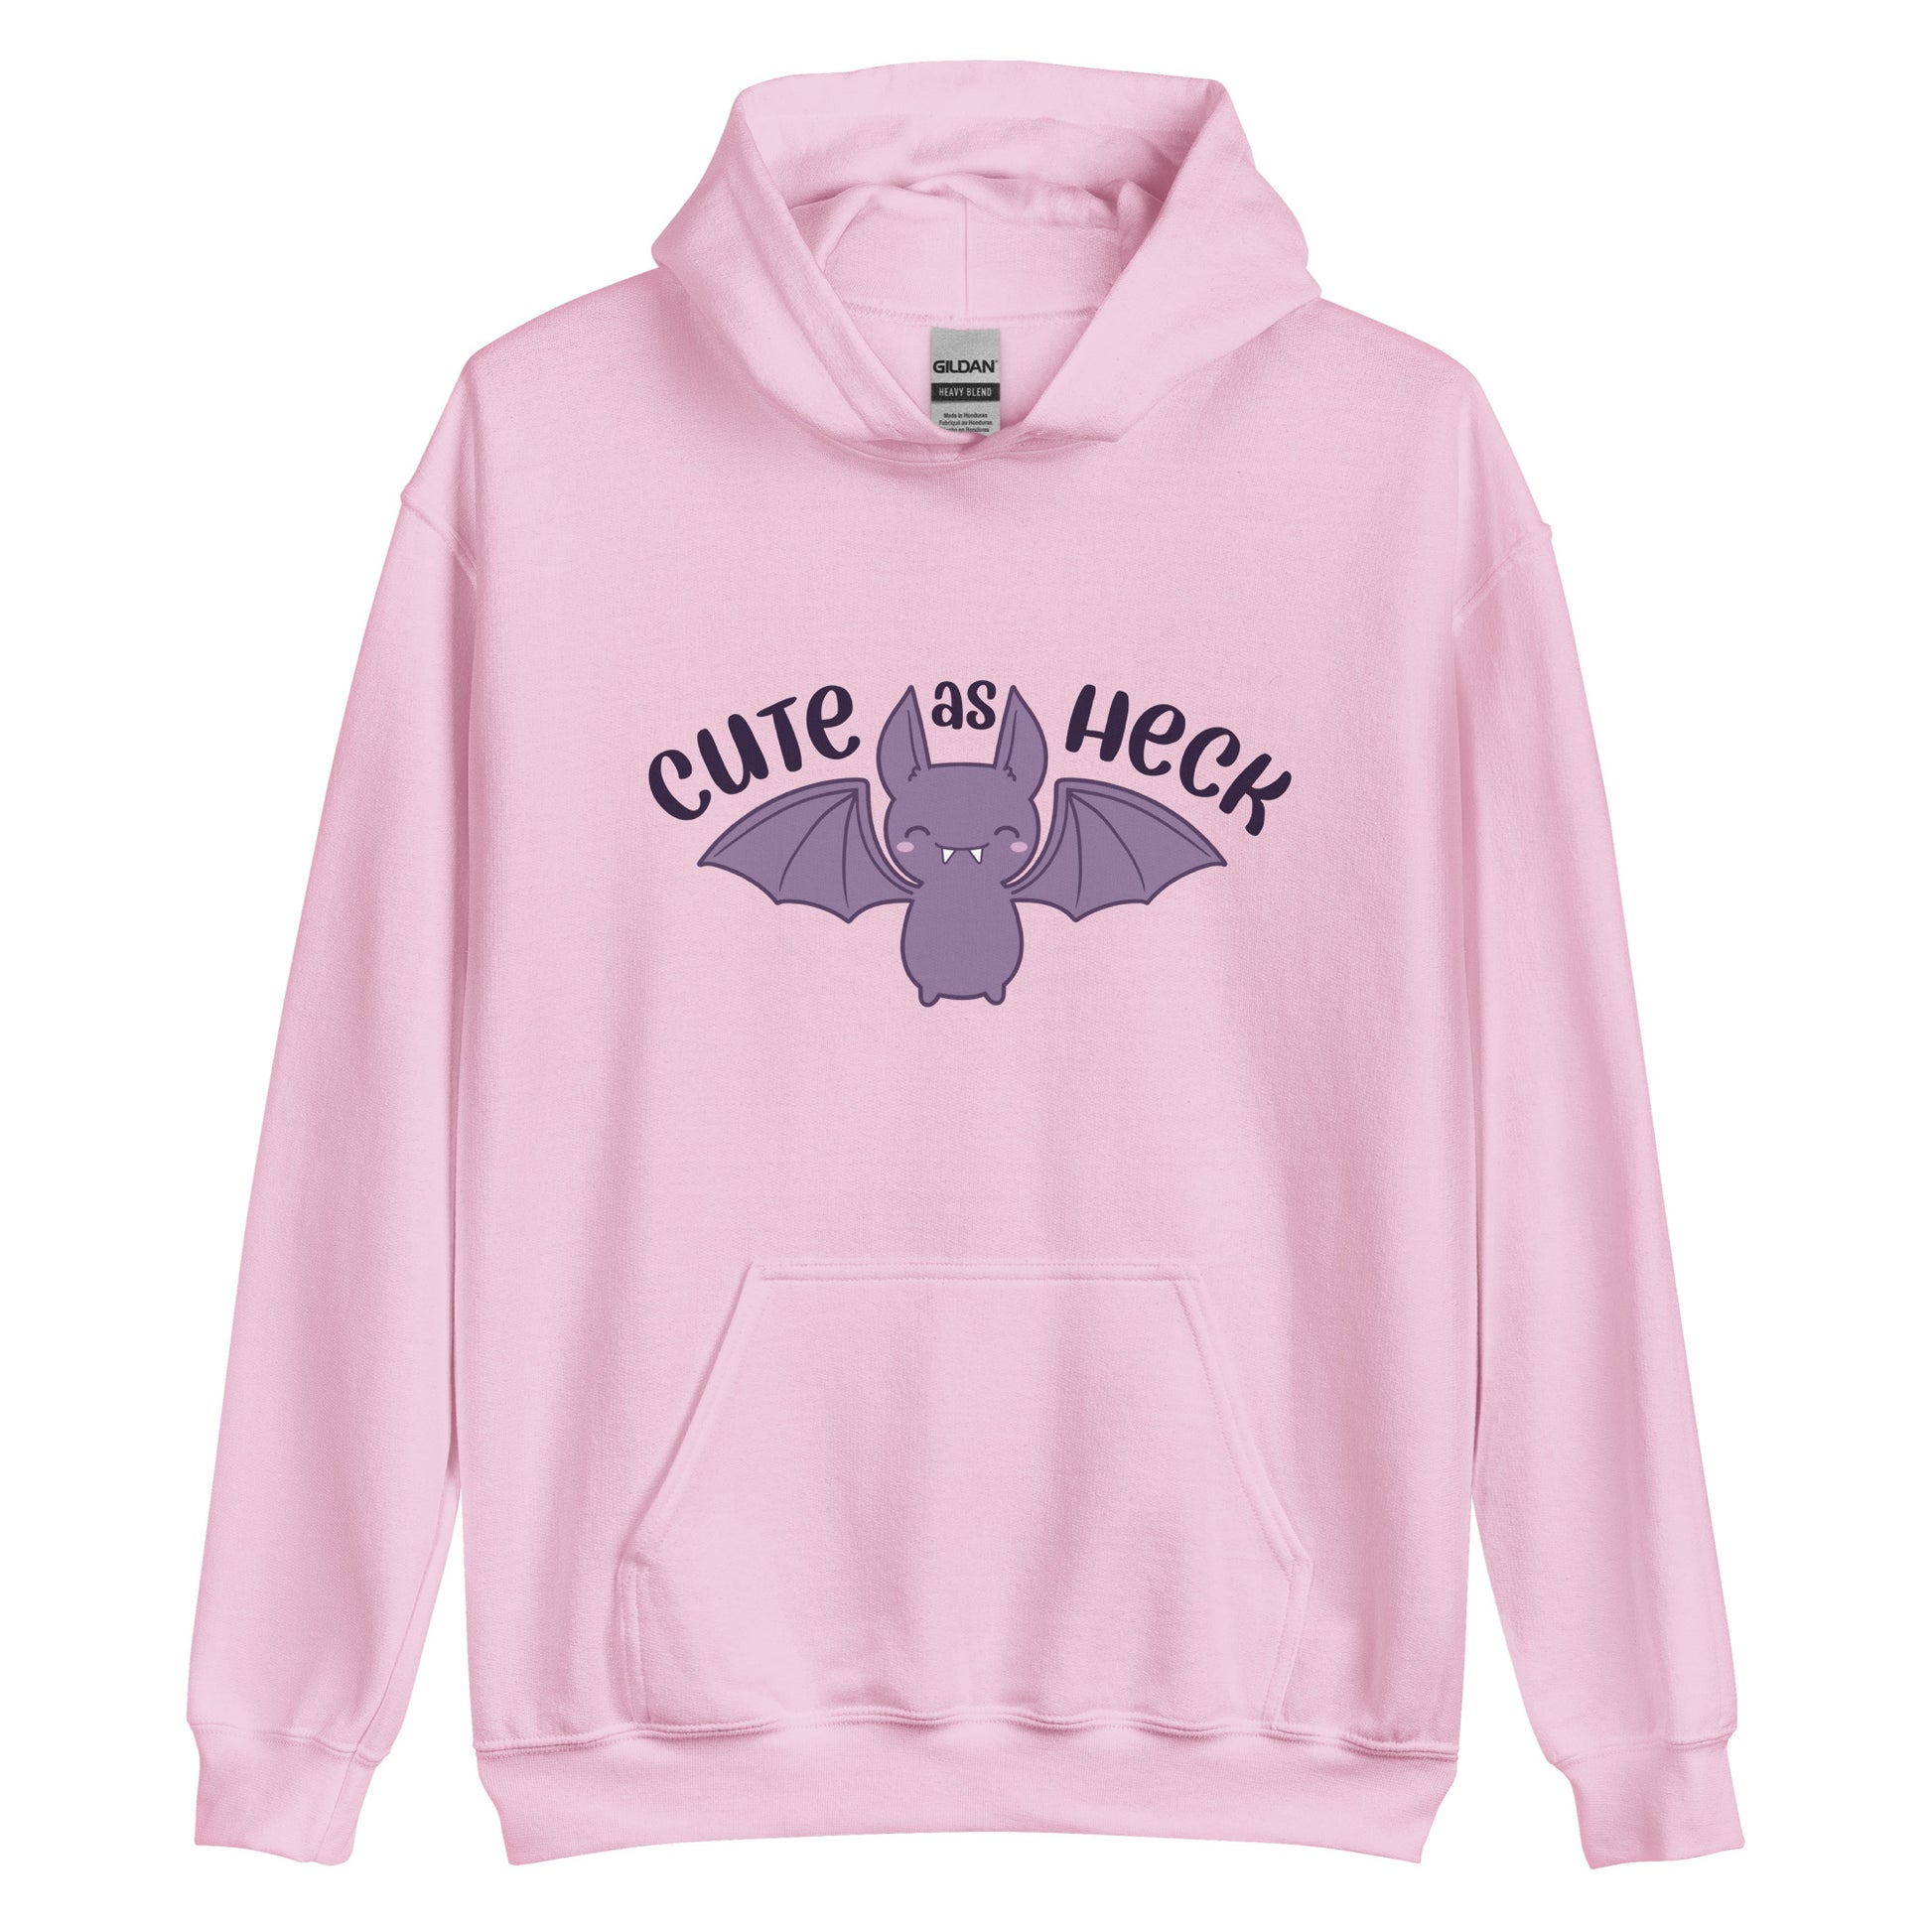 A light pink hooded sweatshirt featuring an illustration of a cute, smiling purple bat. Text above the bat reads "Cute As Heck"